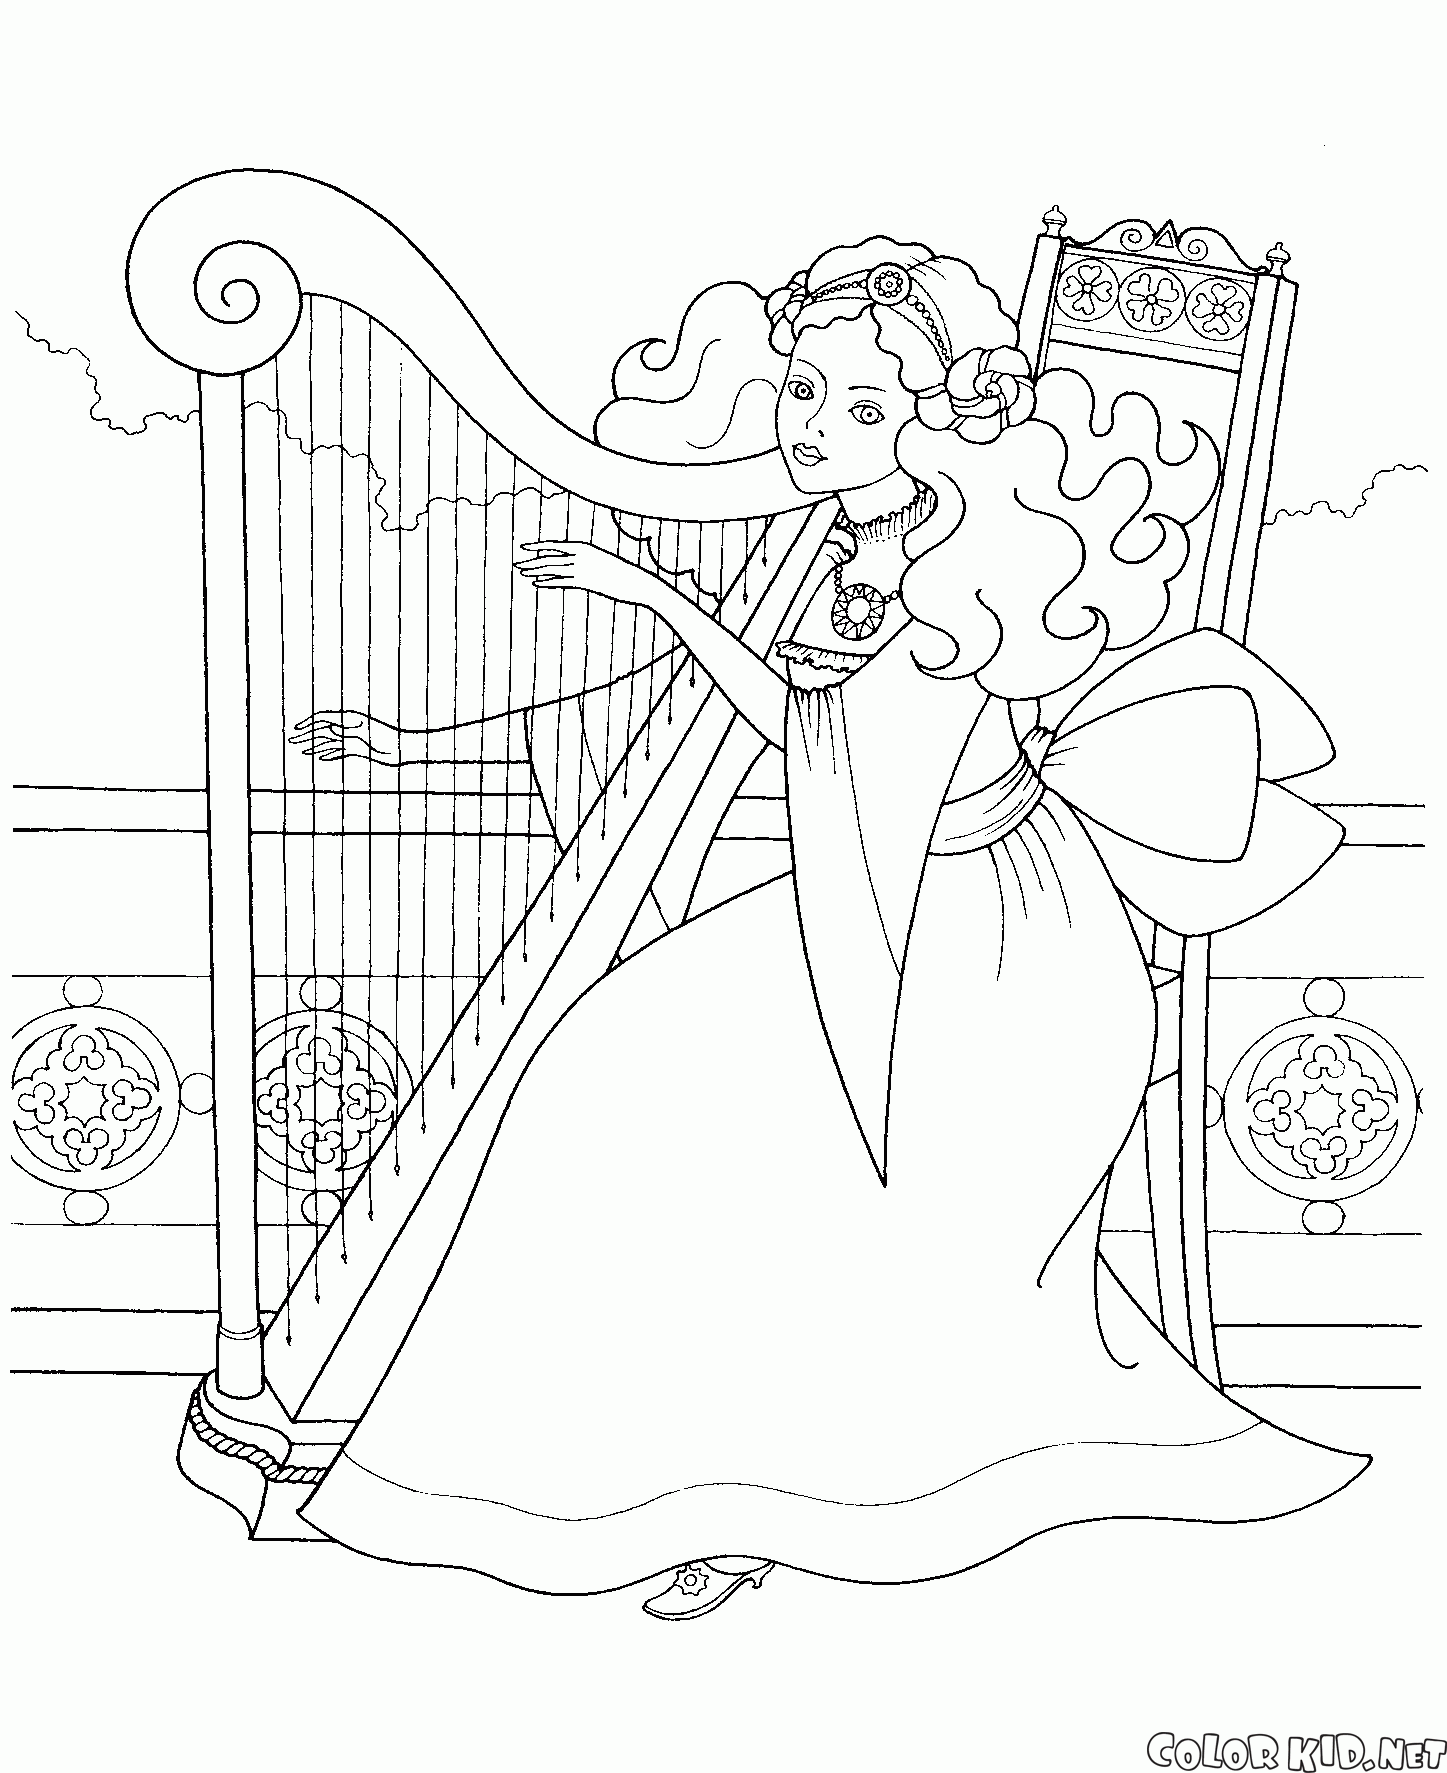 Coloring page - Harp